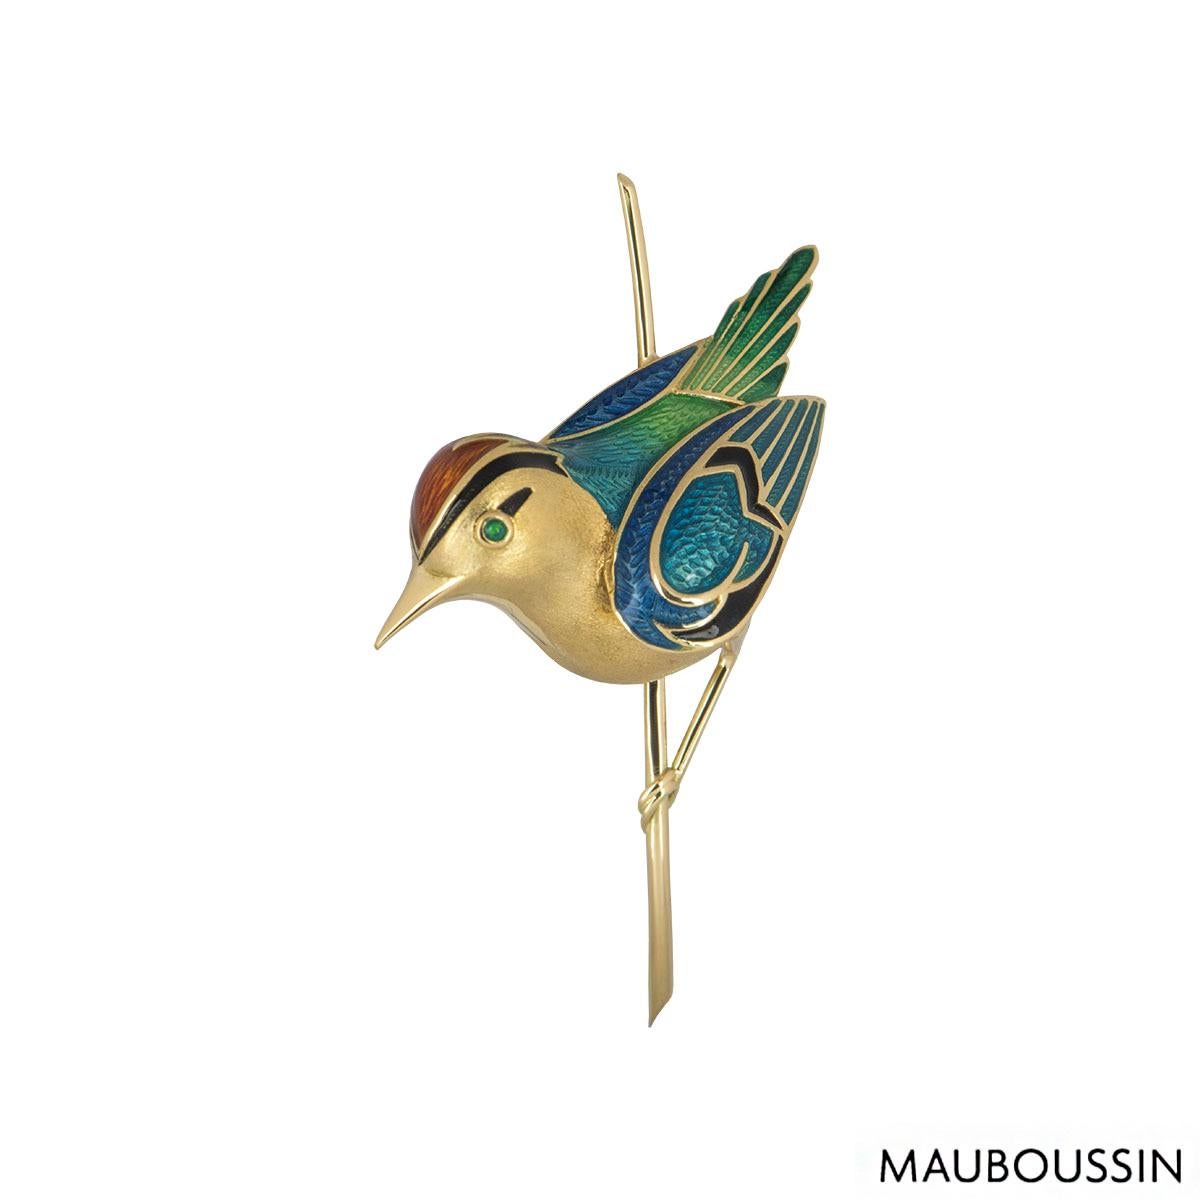 An 18k yellow gold bird brooch by Maboussin. The bird brooch is partially set with polychrome guilloché enamel on the wings and body of the bird with a coloured stone eye. The brooch is fitted with a trombone clasp with a height 5.60cm, length of